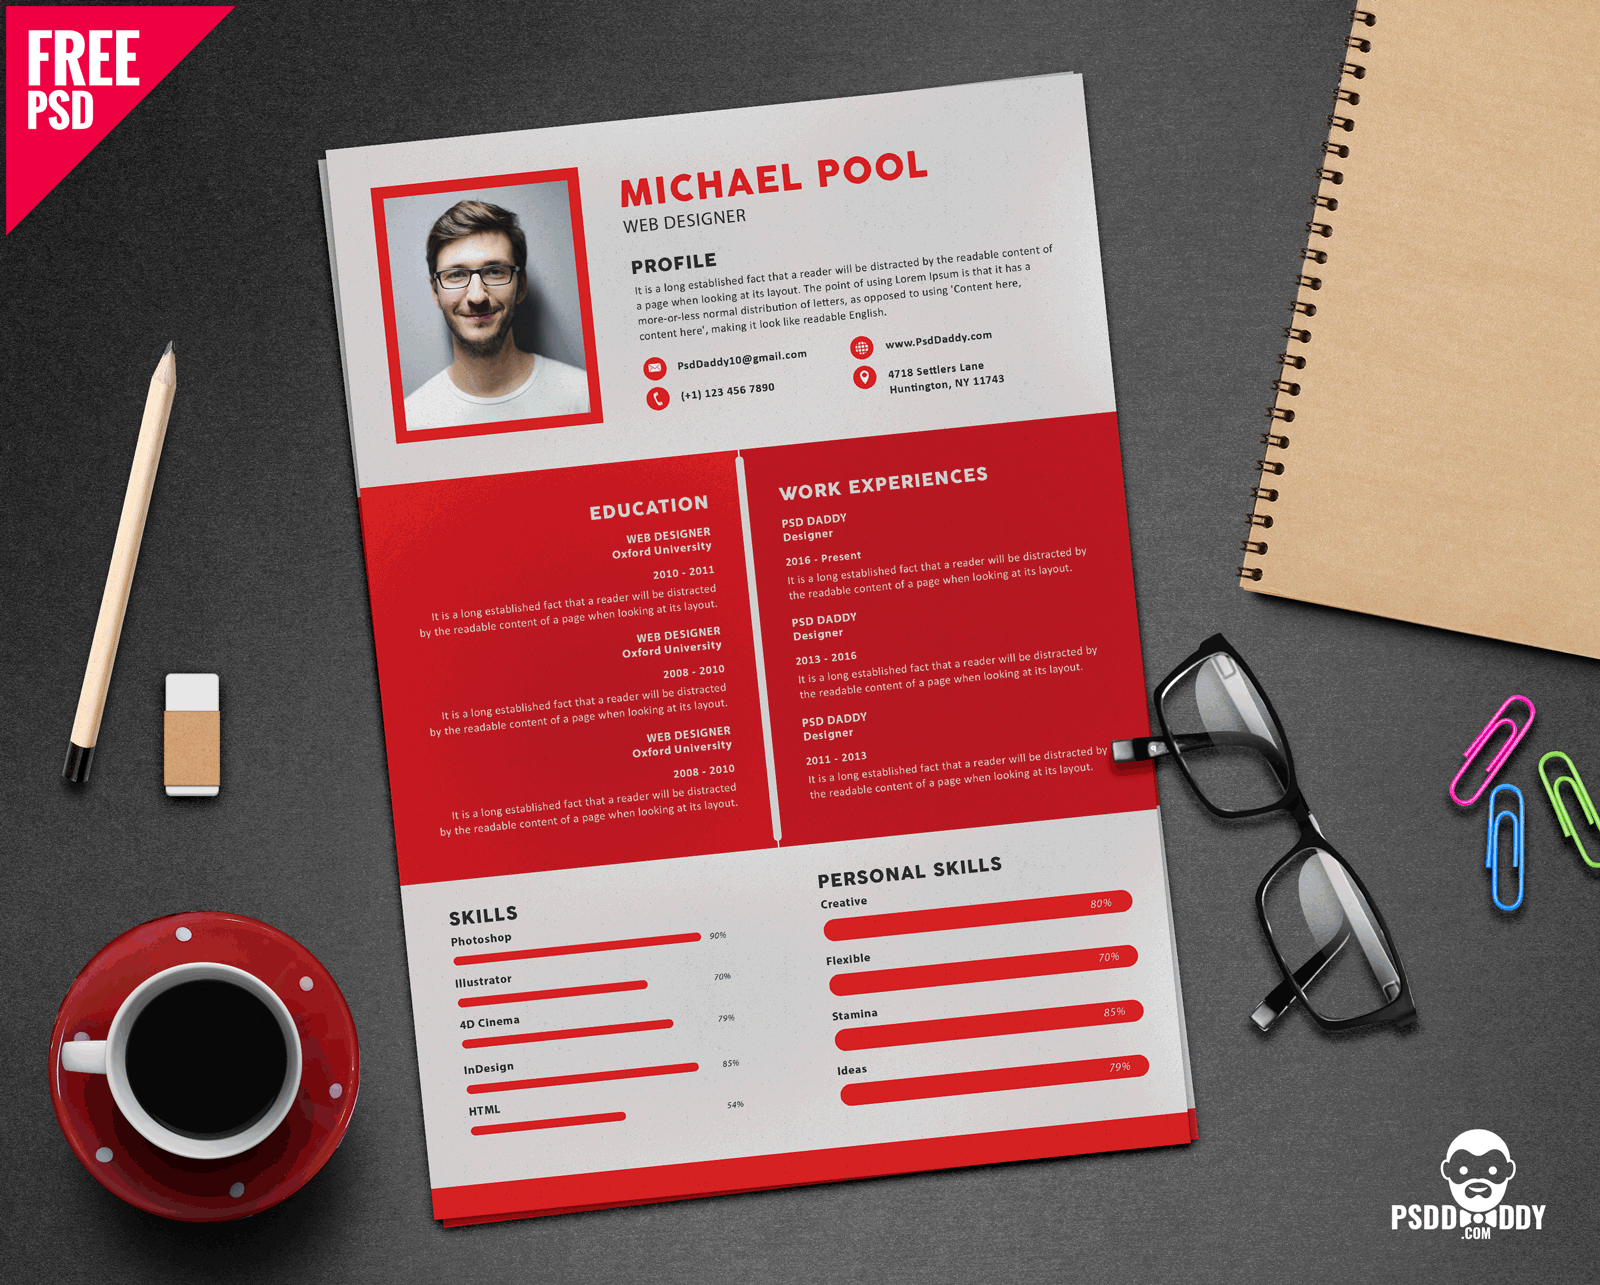  Download Clean And Designer Resume PSD PsdDaddy